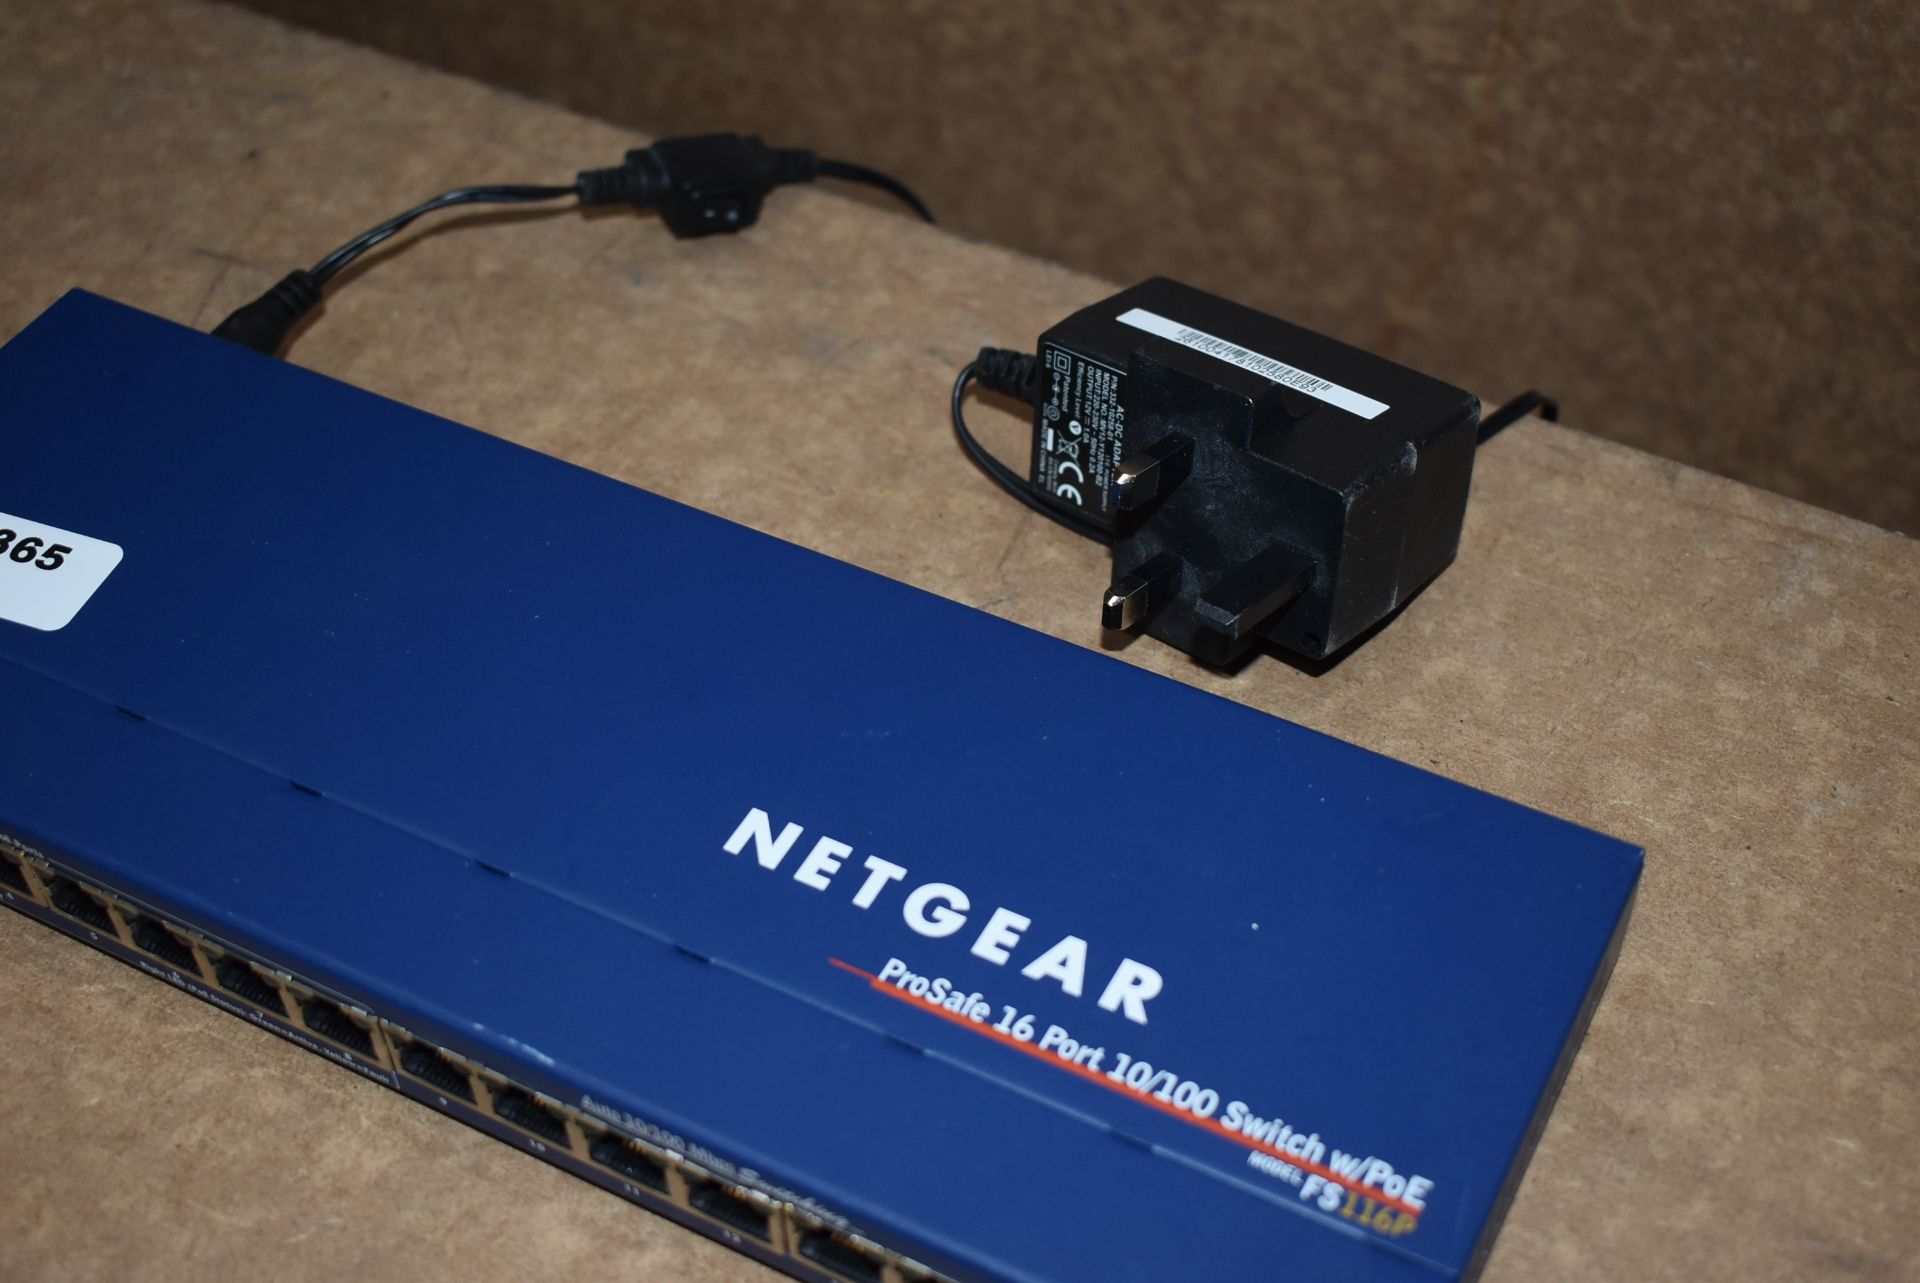 1 x Netgear ProSafe 16 Port 10/100 Network Switch With PoE - Type FS116P - Includes Power Cable - - Image 3 of 5